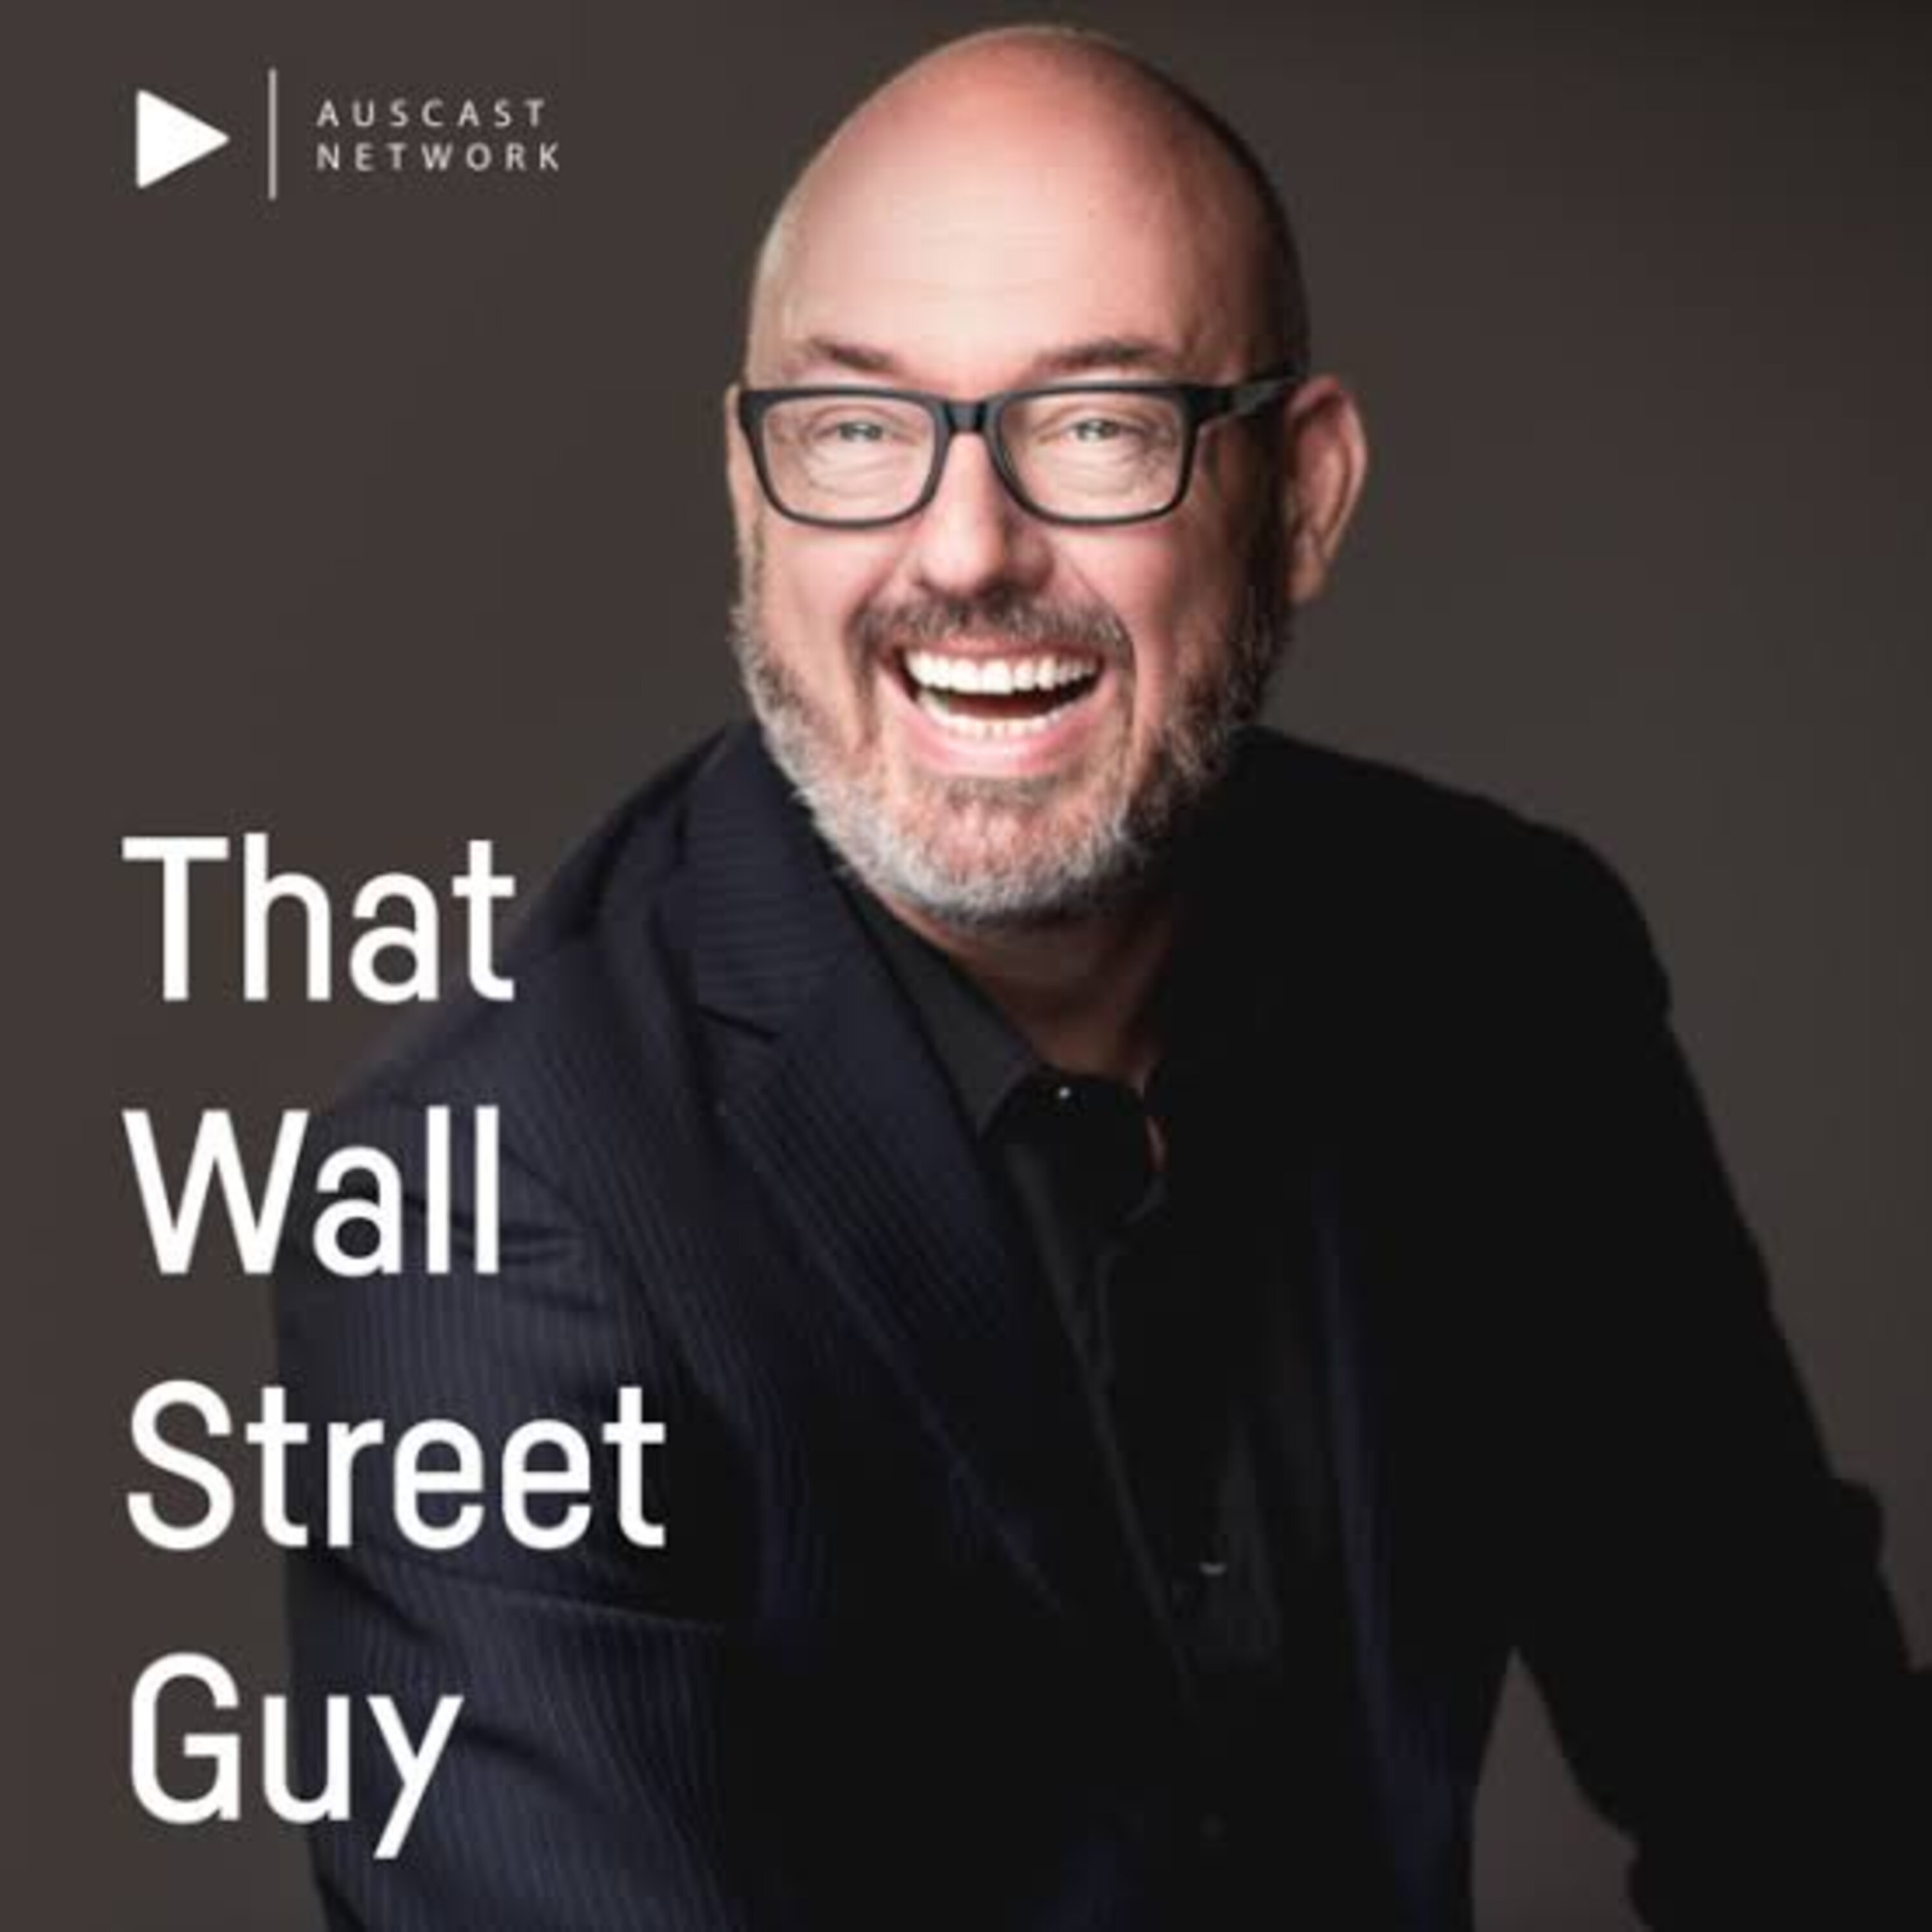 That Wall Street Guy Live at The Adelaide Podcast Festival